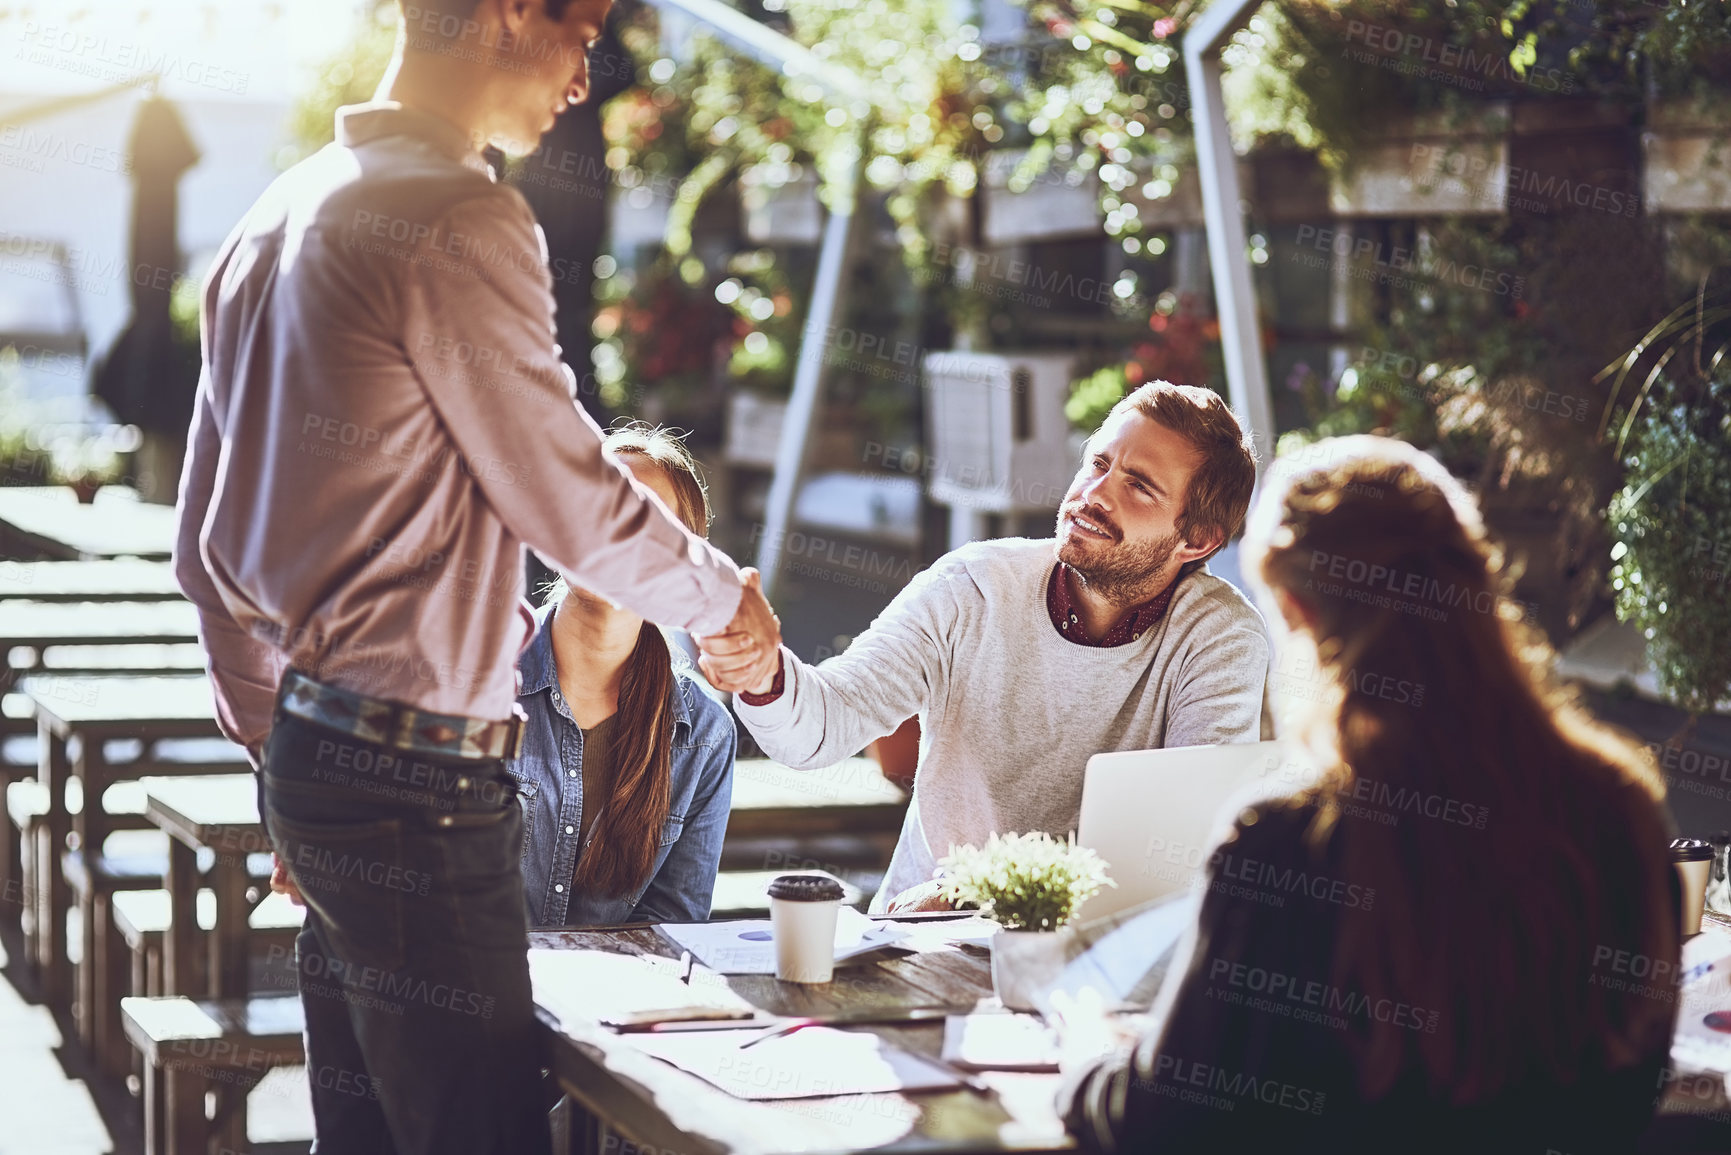 Buy stock photo Shot of colleagues shaking hands during a meeting at an outdoor cafe